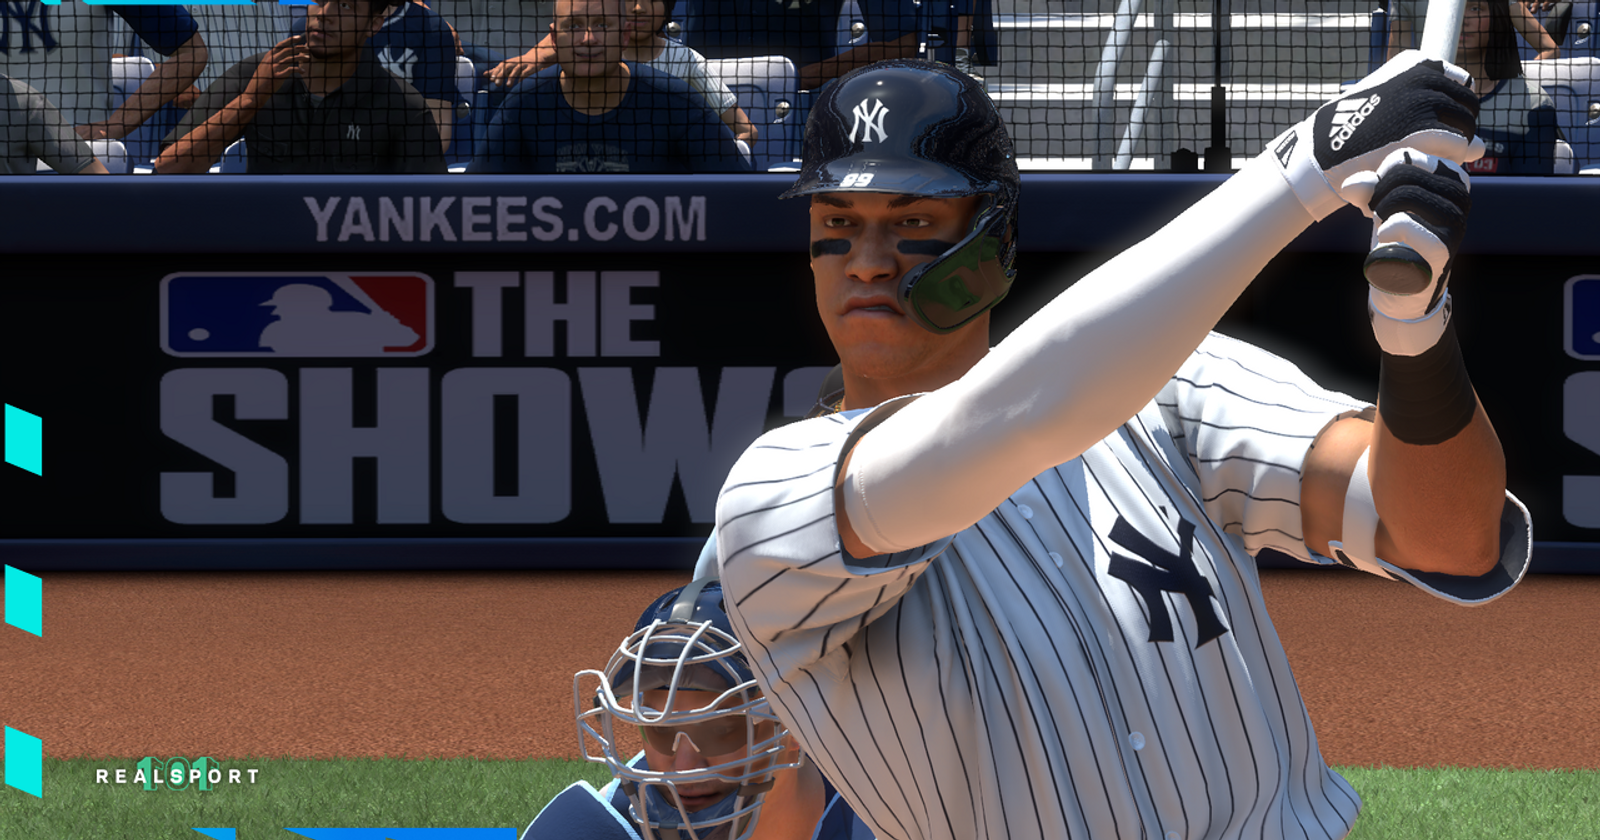 How To Make The New York Yankees Jerseys In Diamond Dynasty Mlb The Show 20  